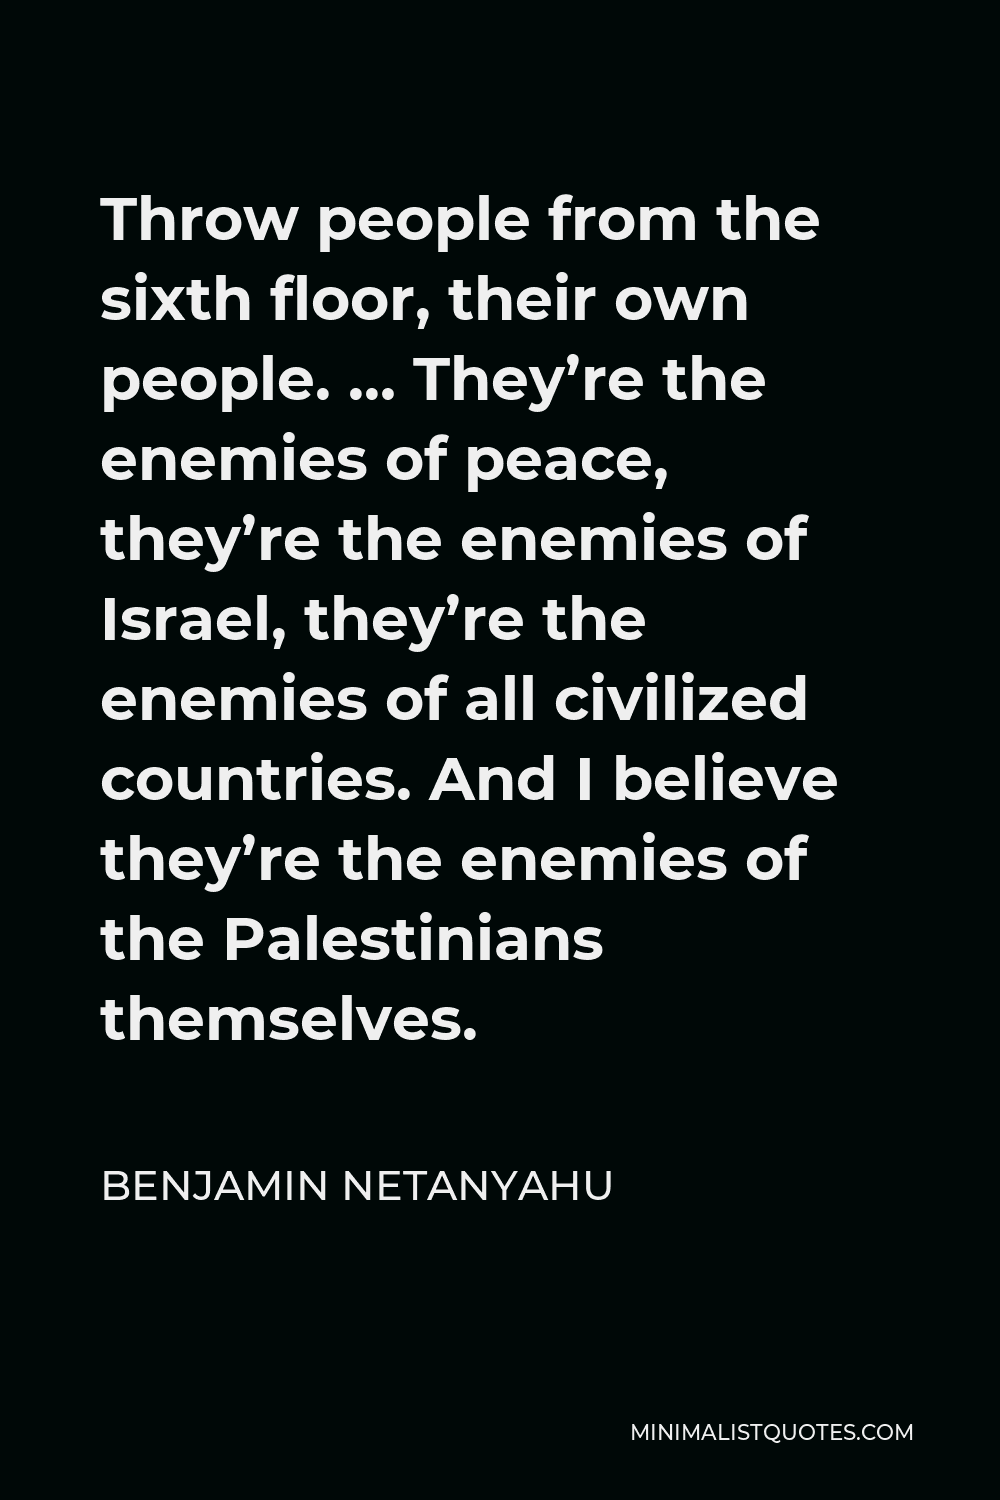 Benjamin Netanyahu Quote - Throw people from the sixth floor, their own people. … They’re the enemies of peace, they’re the enemies of Israel, they’re the enemies of all civilized countries. And I believe they’re the enemies of the Palestinians themselves.